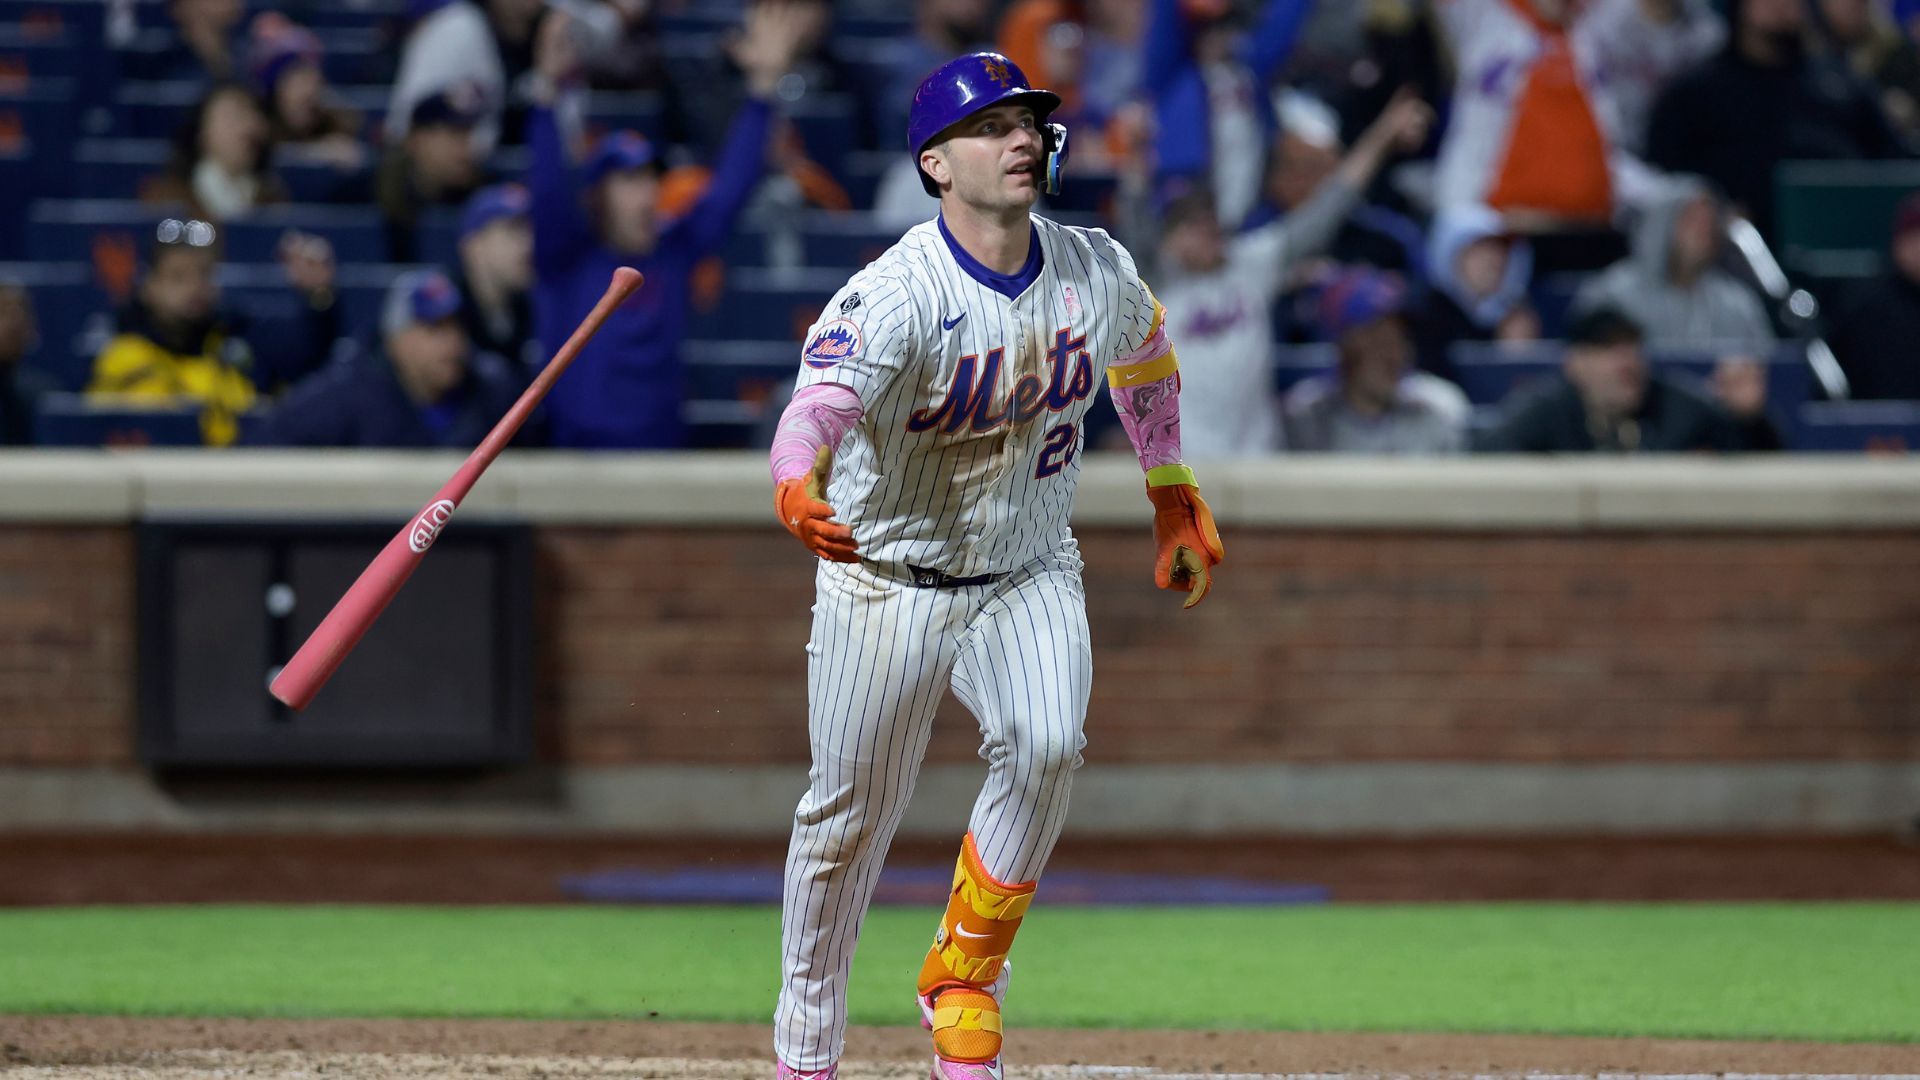 Read more about the article How to watch today’s MLB game Chicago Cubs vs. New York Mets: Live stream, TV channel and start time